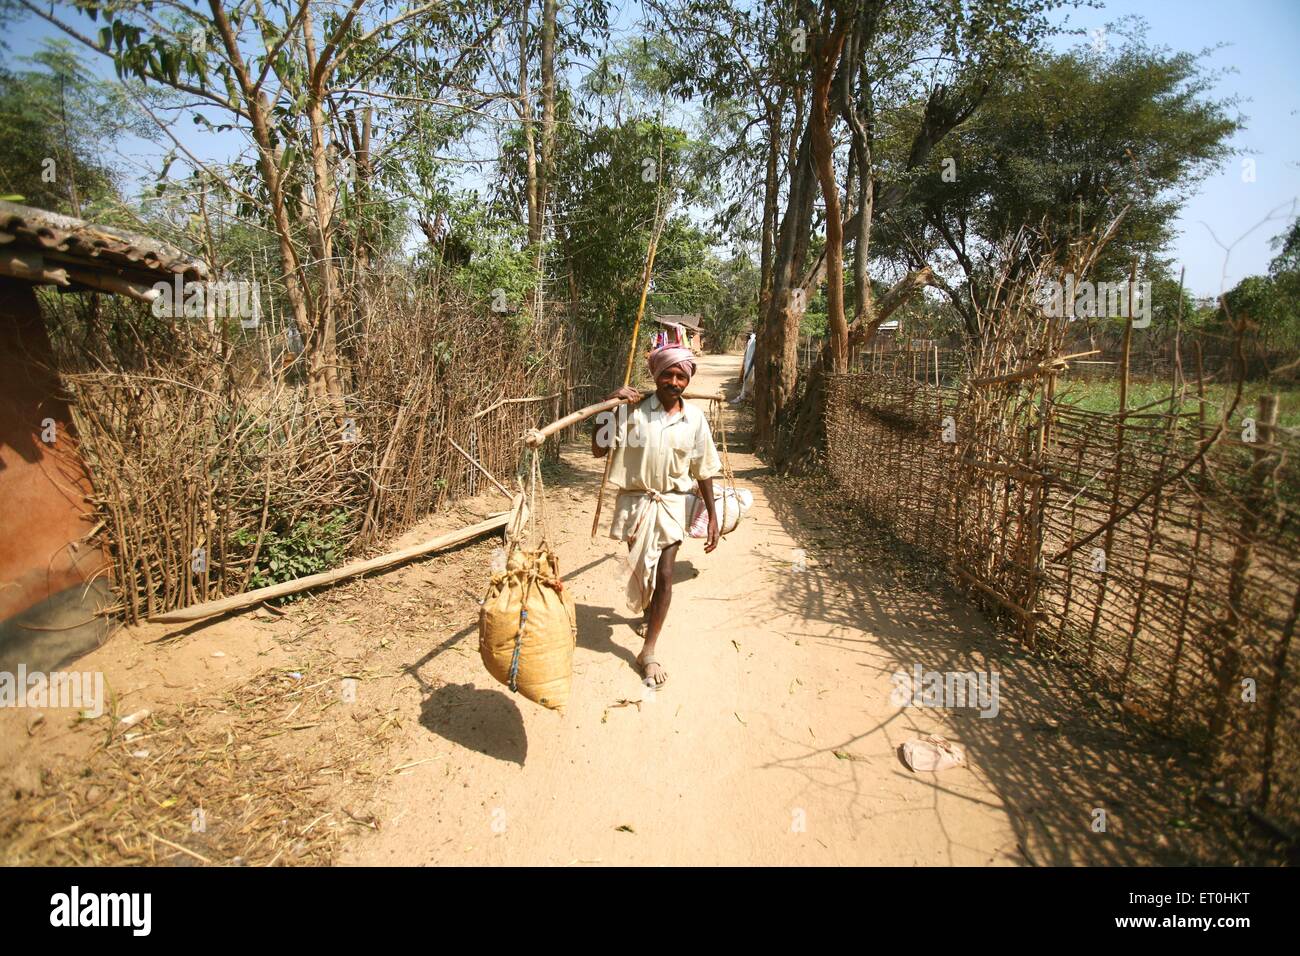 Indian rural man carrying grain balance scale village road, Ranchi, Jharkhand, India, Indian life Stock Photo